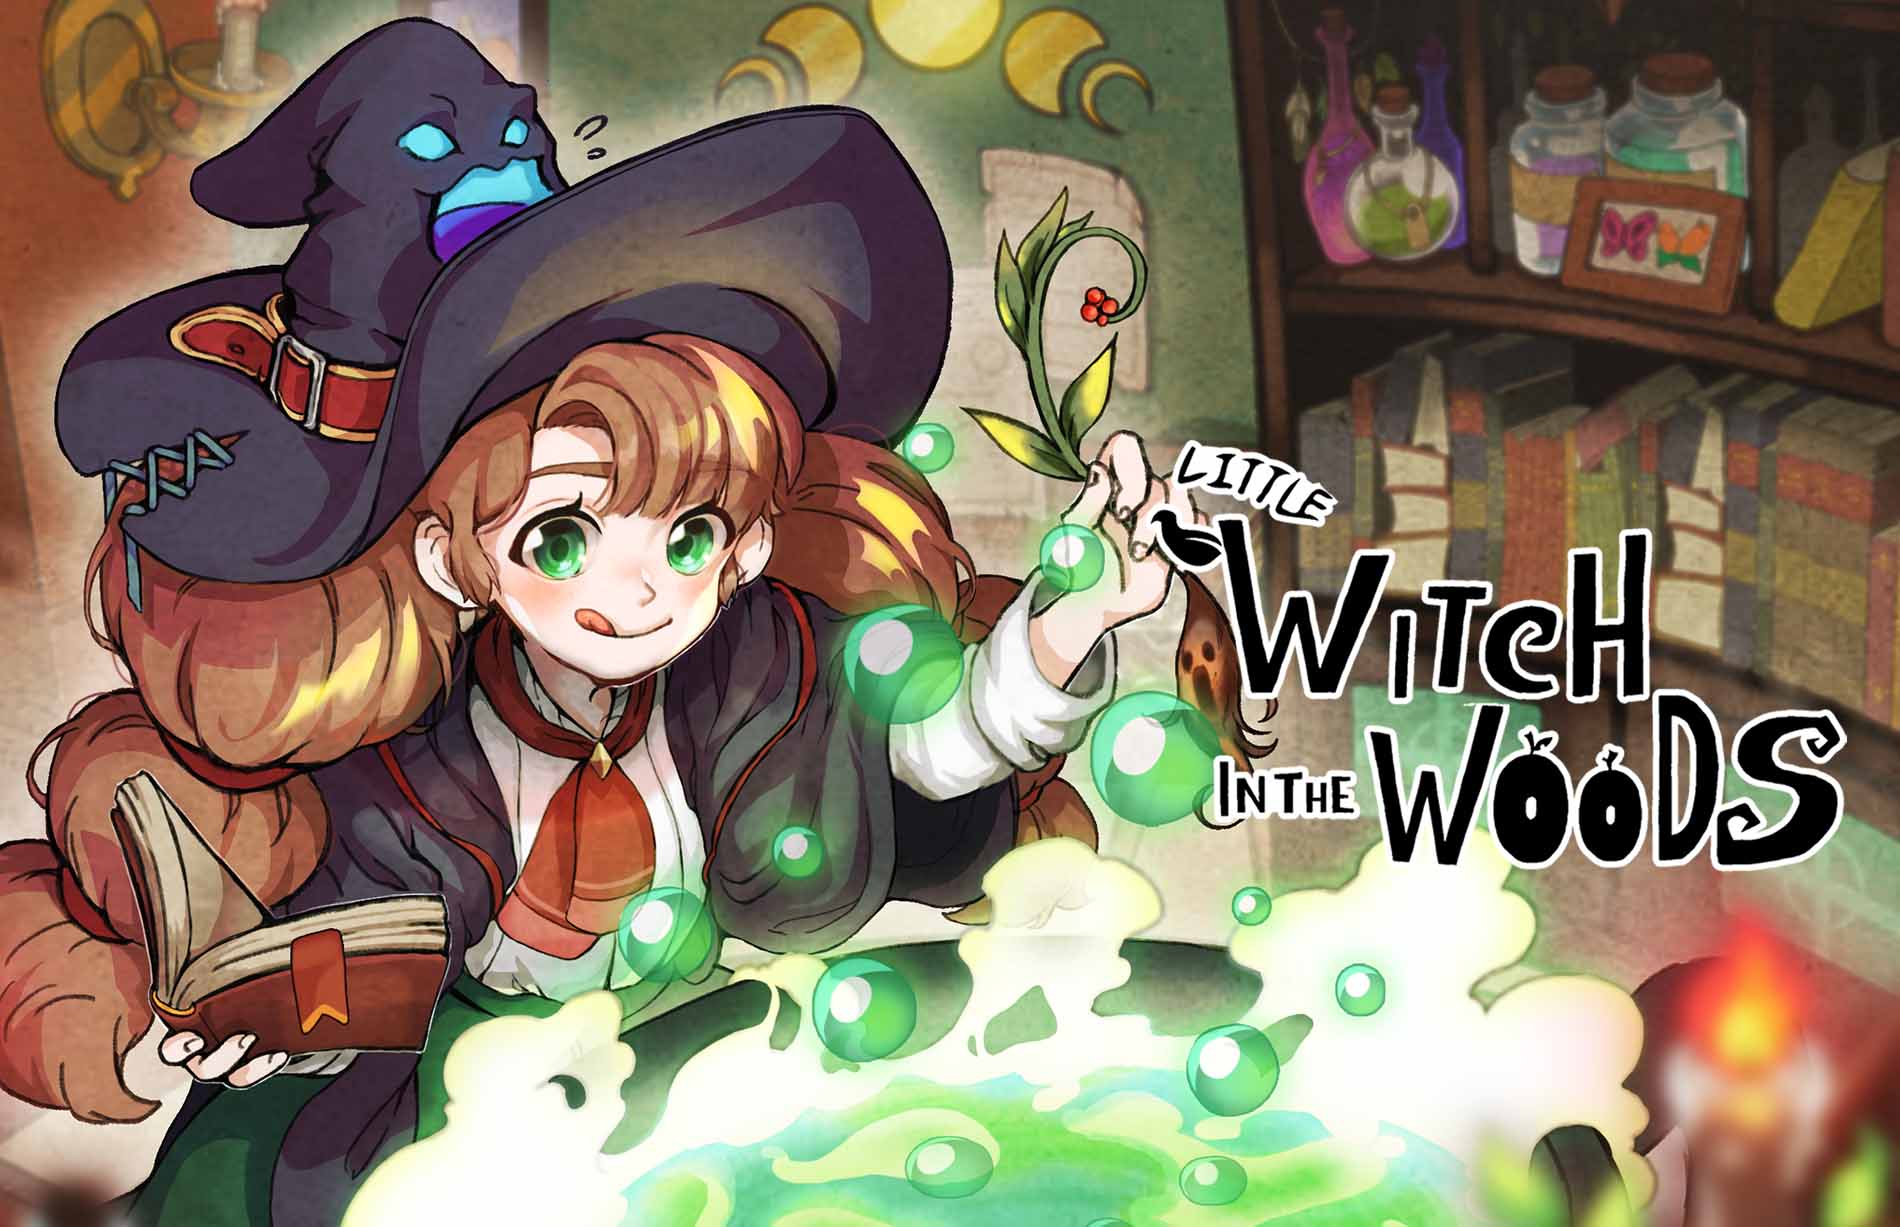 E3 2021: Little Witch in the Woods heading to Xbox Game Pass